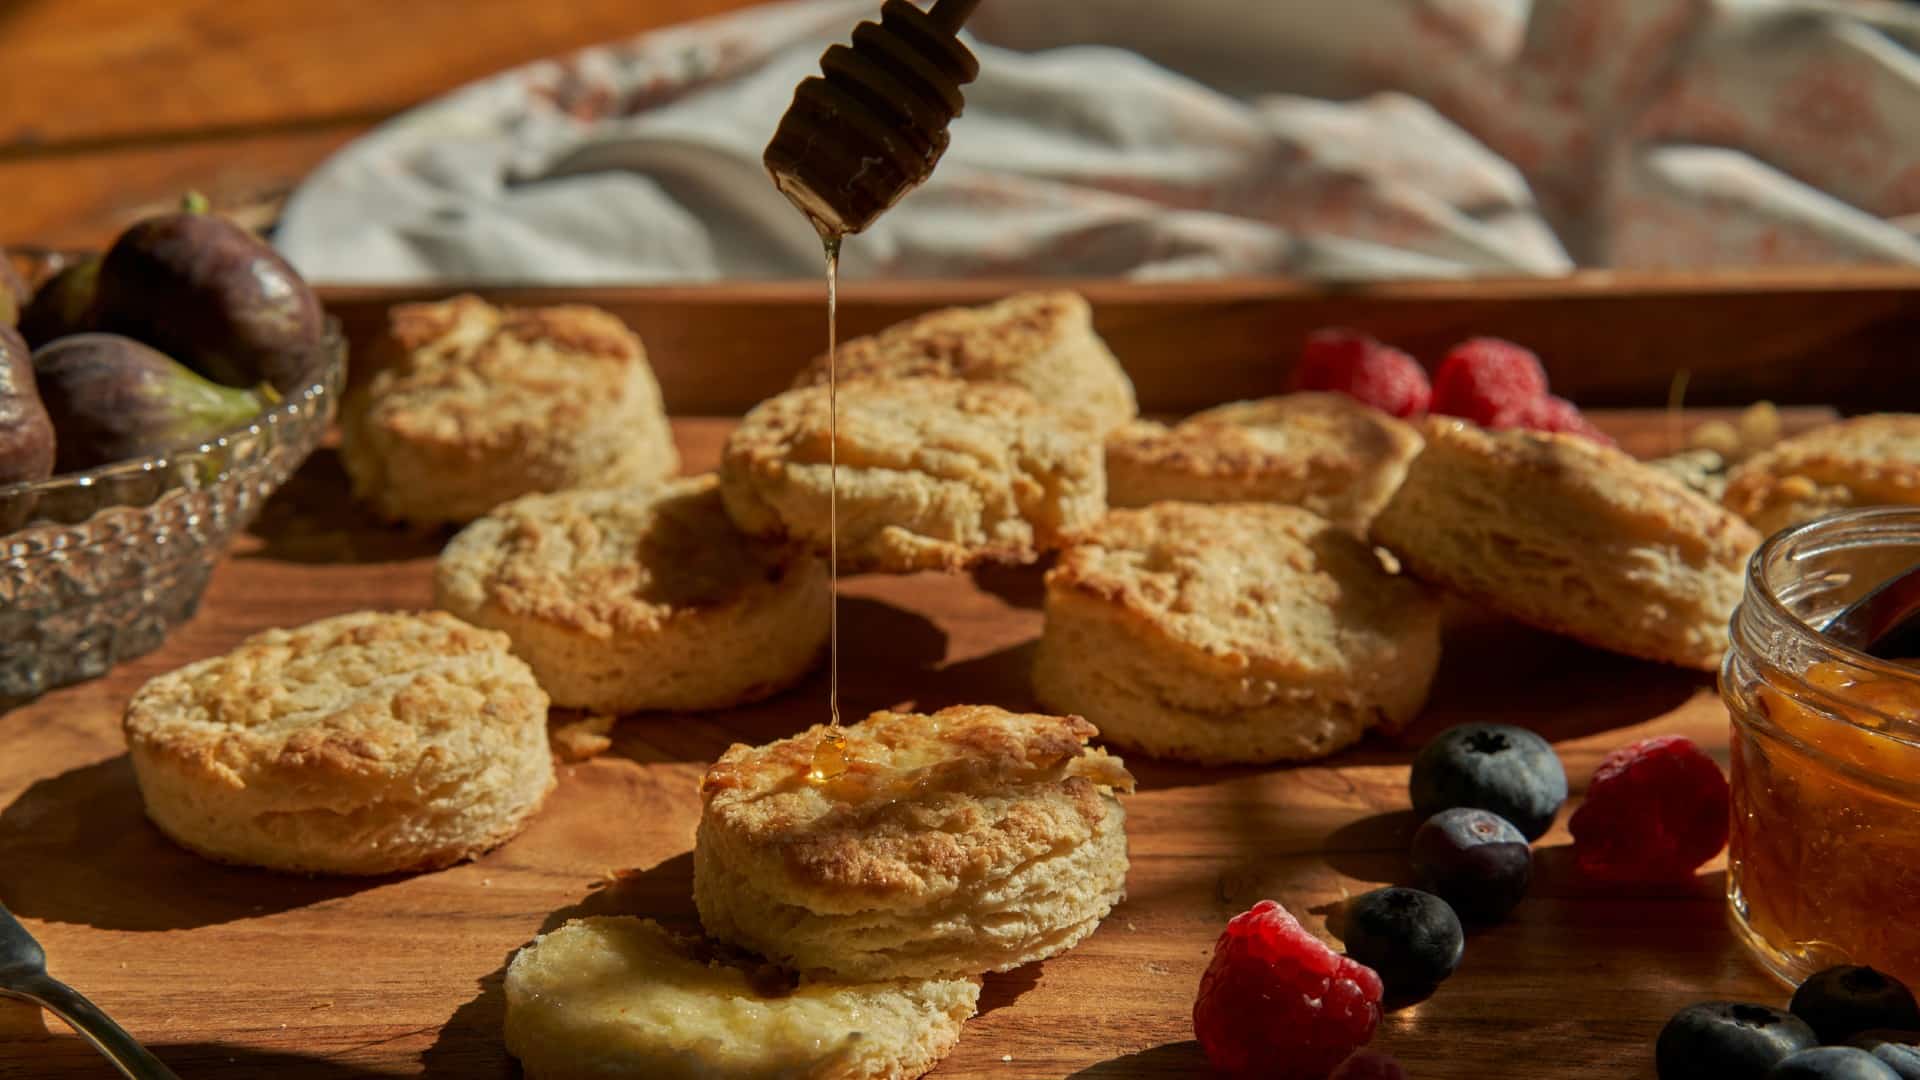 Freshly baked biscuits with honey being drizzled over top and berries on a wooden tray